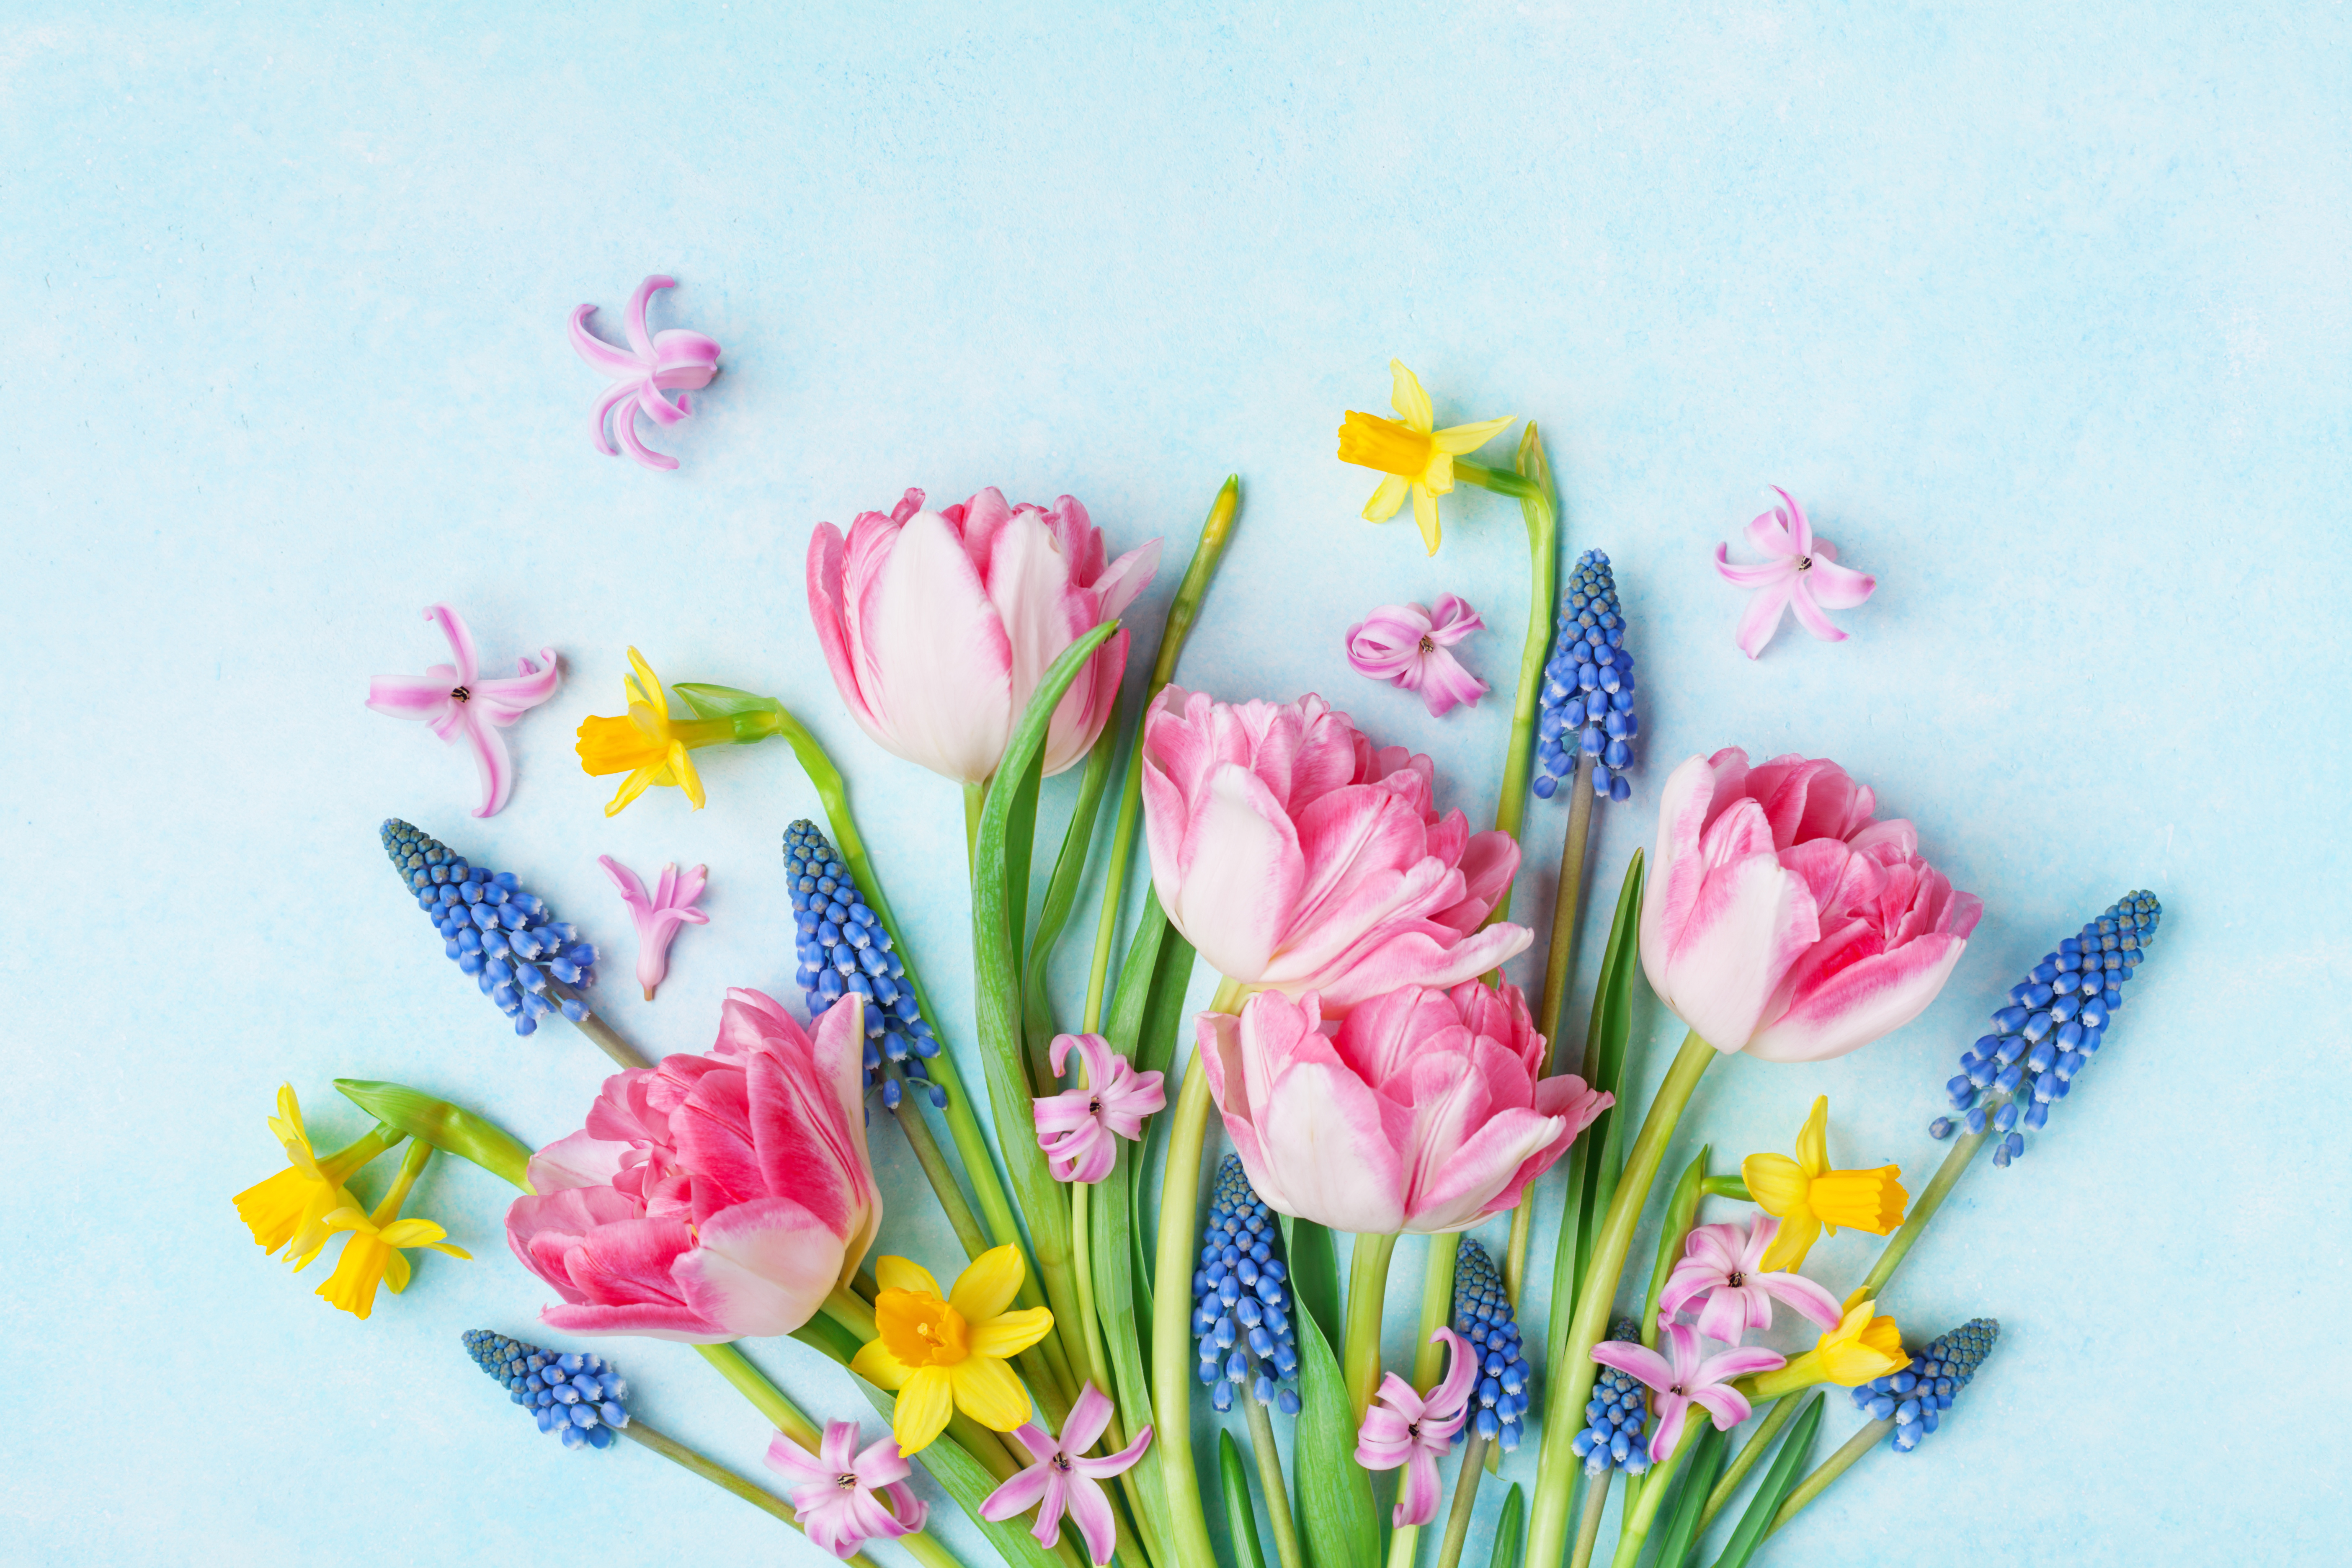 MONEY HACKS: Are Your Finances ‘Blooming’ this Spring?